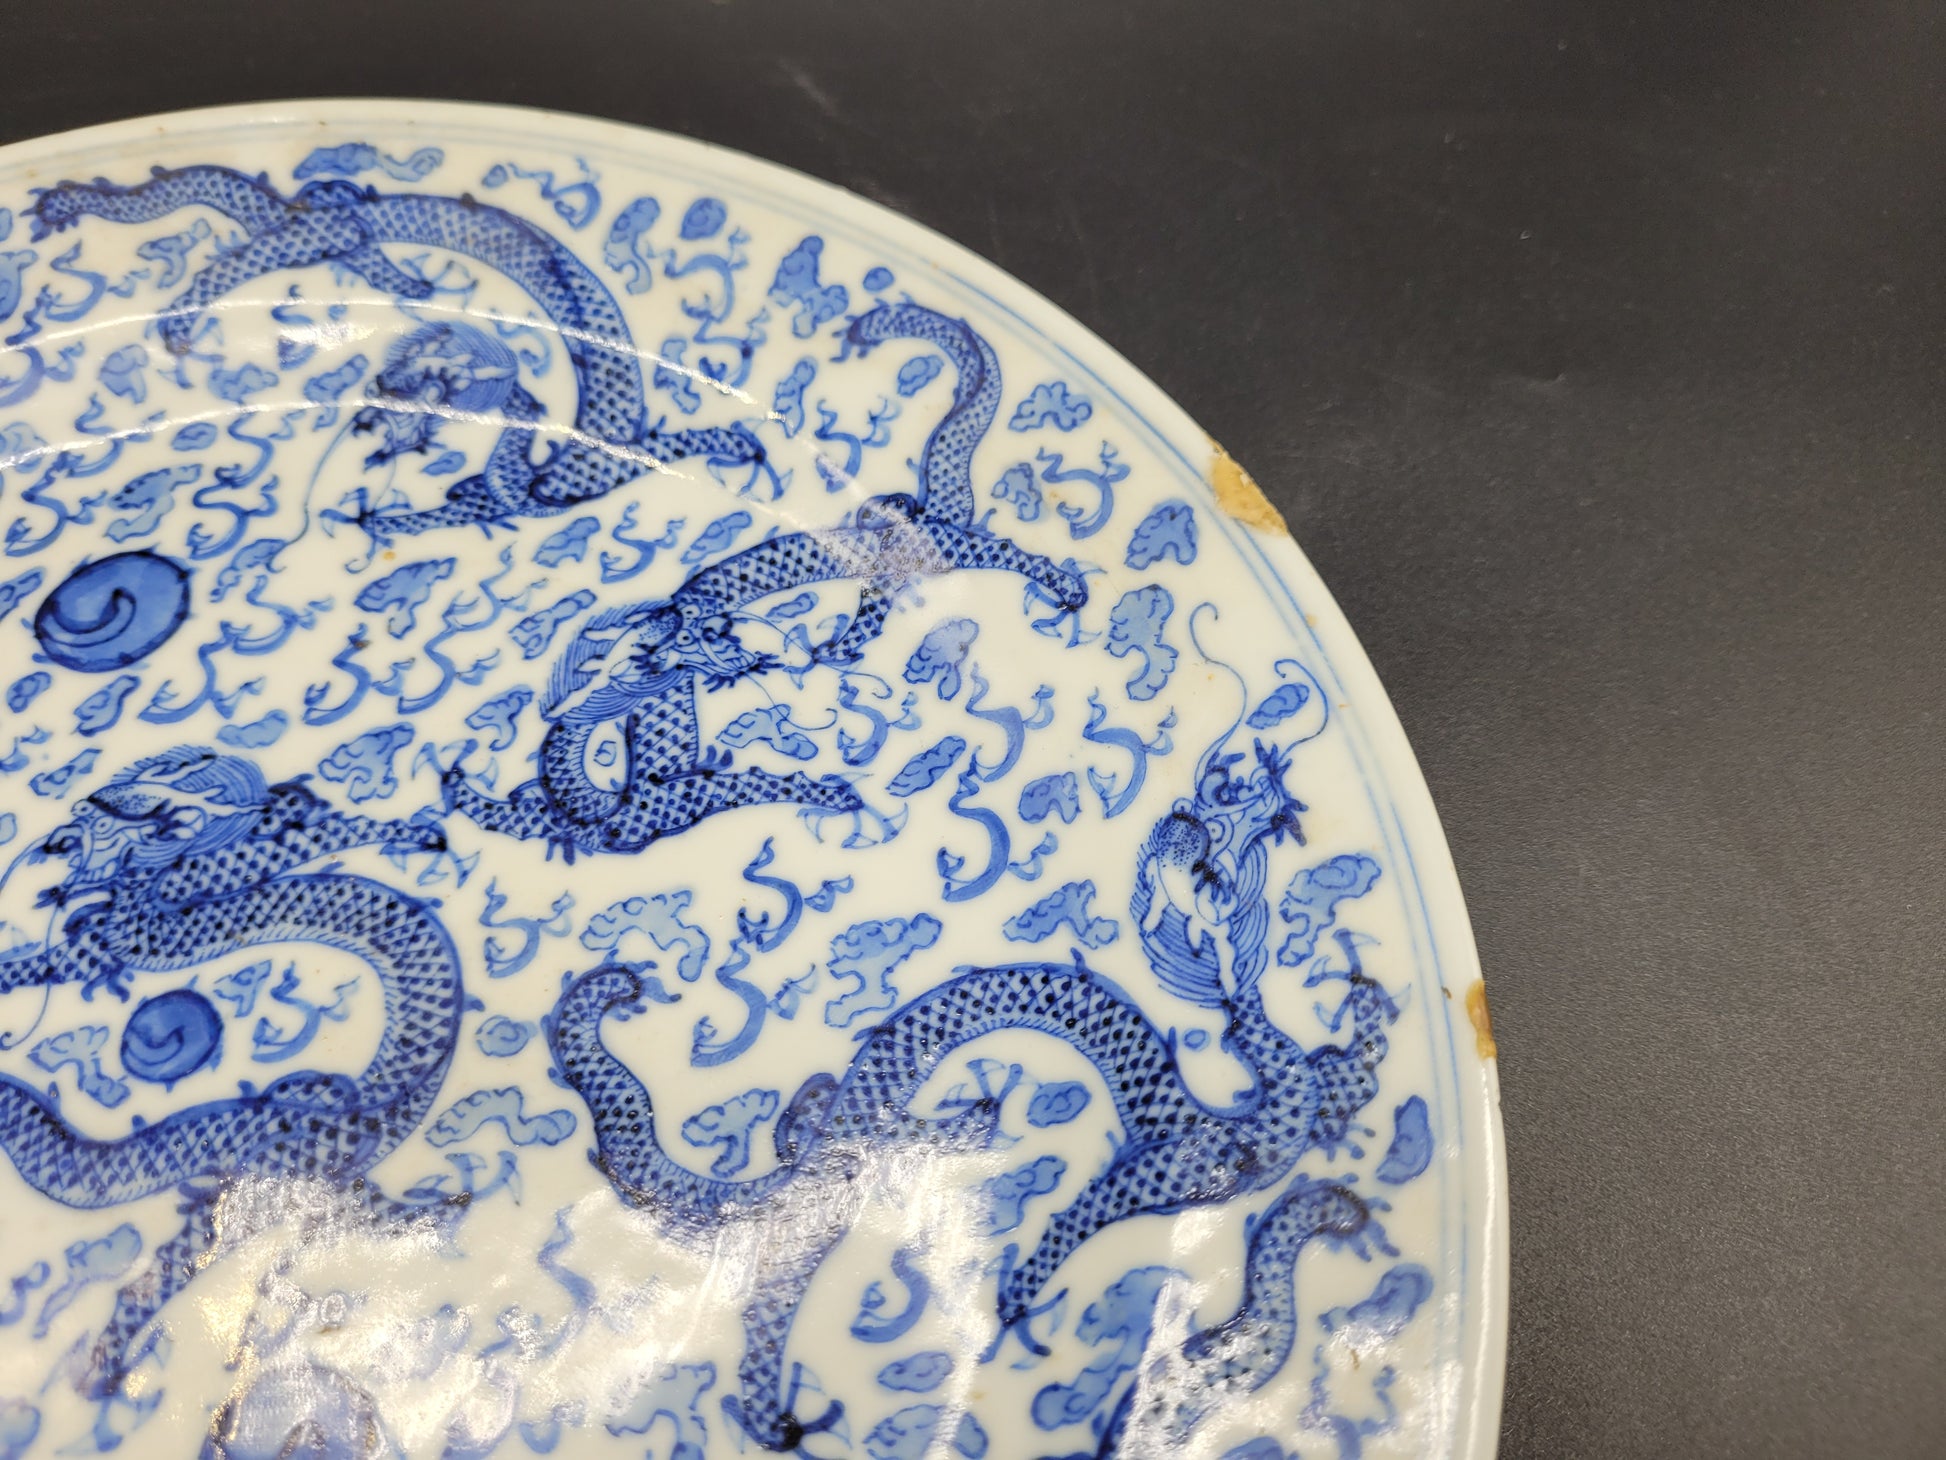 ASIAN ANTIQUES ONLINE Beautiful Chinese Kangxi Period ( 1662-1722 ) Blue and White Dragon Plate 